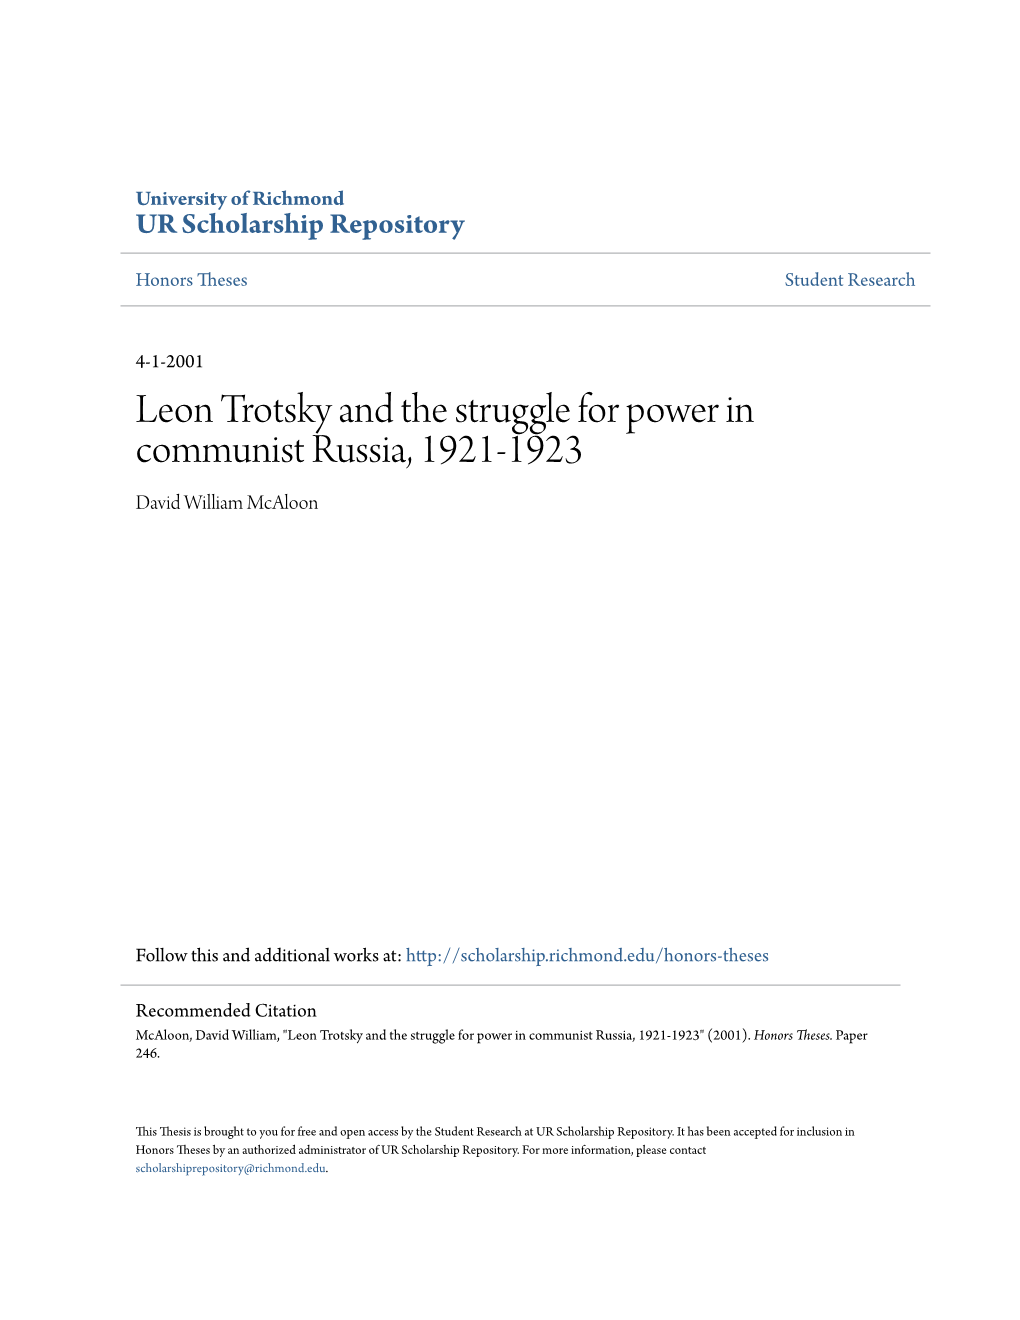 Leon Trotsky and the Struggle for Power in Communist Russia, 1921-1923 David William Mcaloon